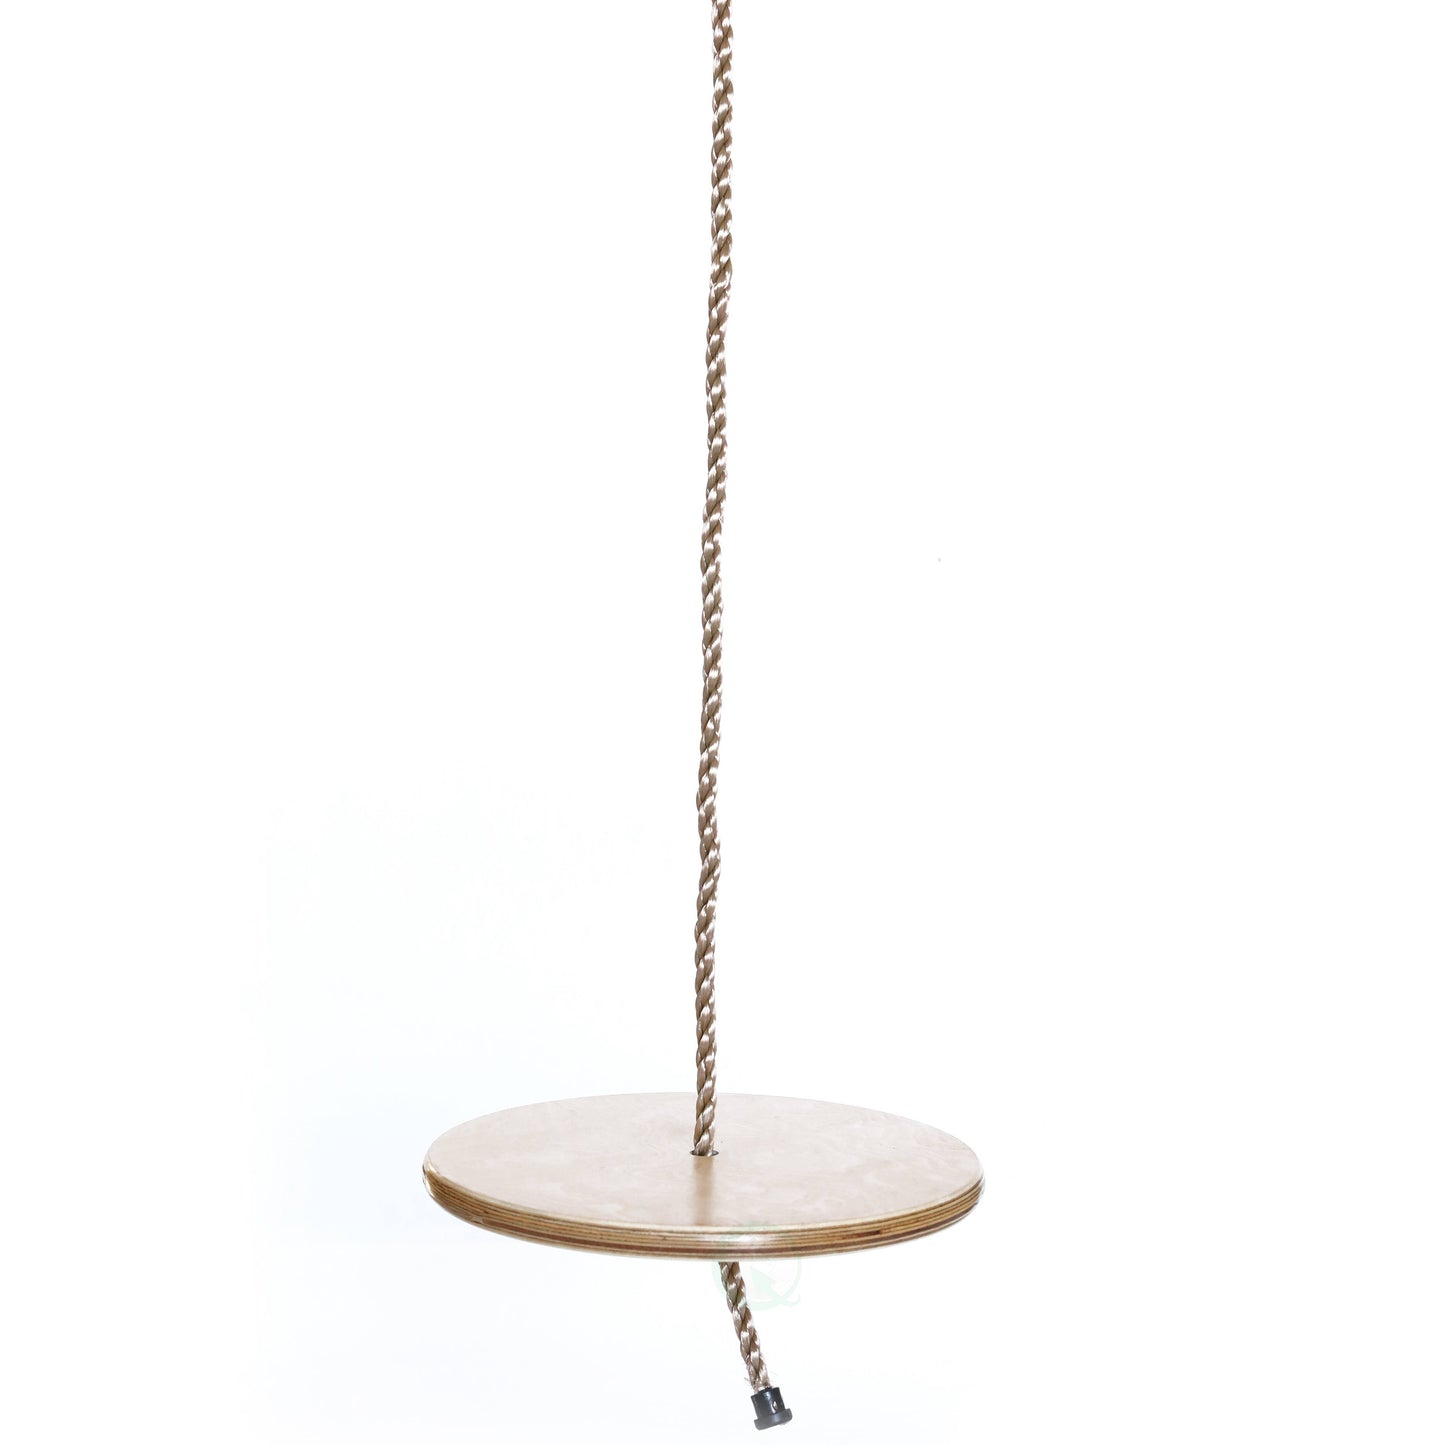 Wooden Round Swing Seat with Rope